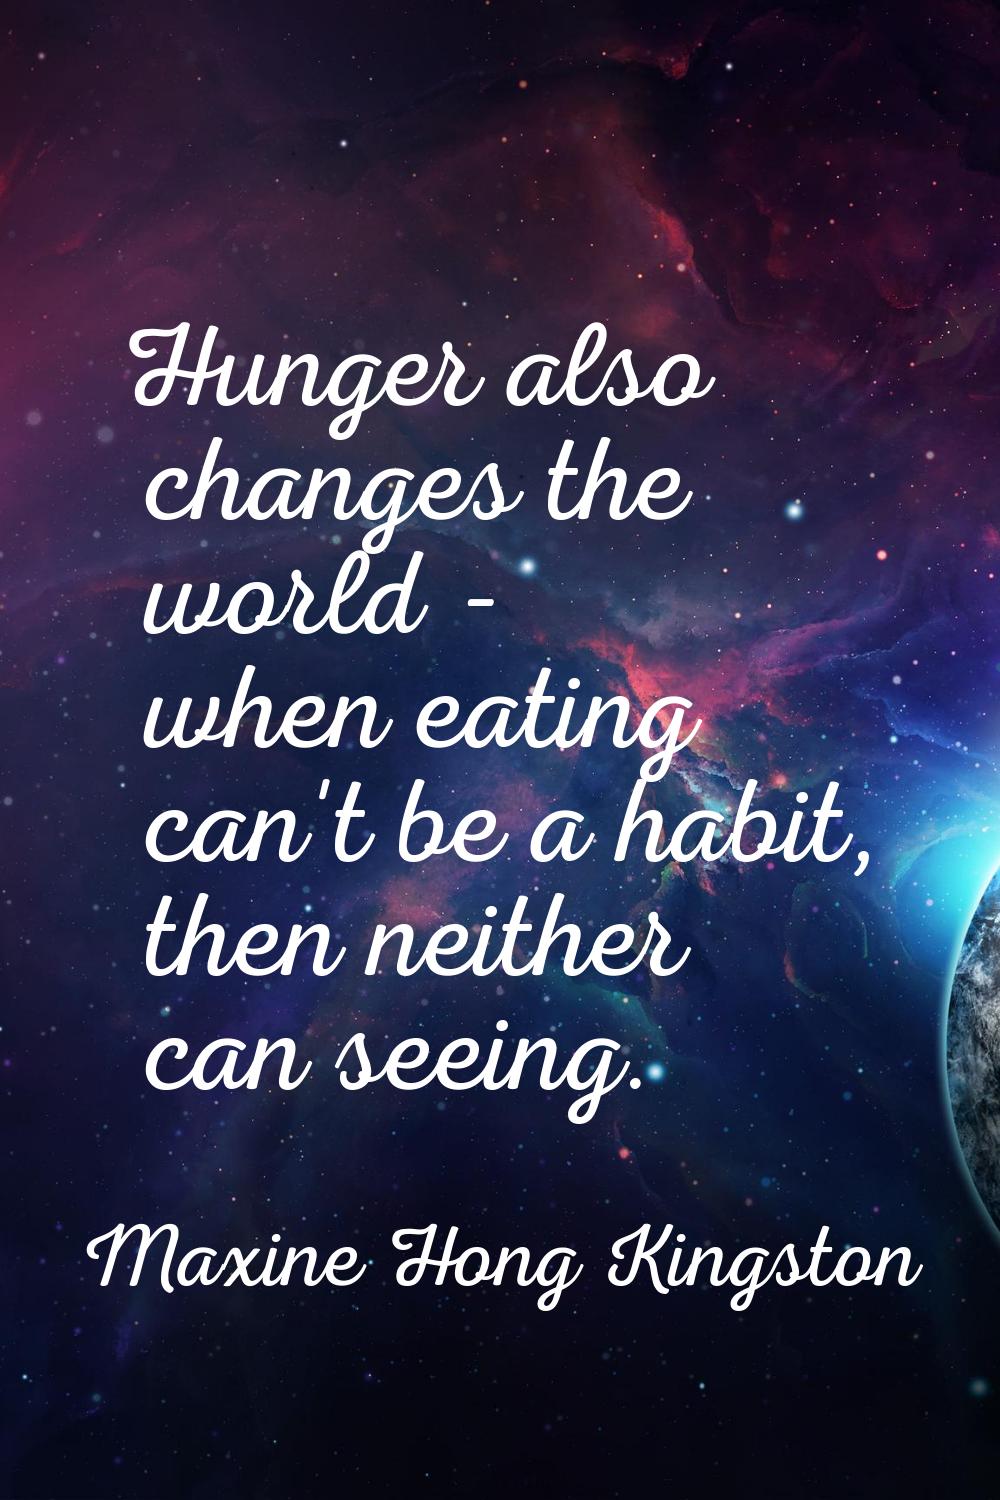 Hunger also changes the world - when eating can't be a habit, then neither can seeing.